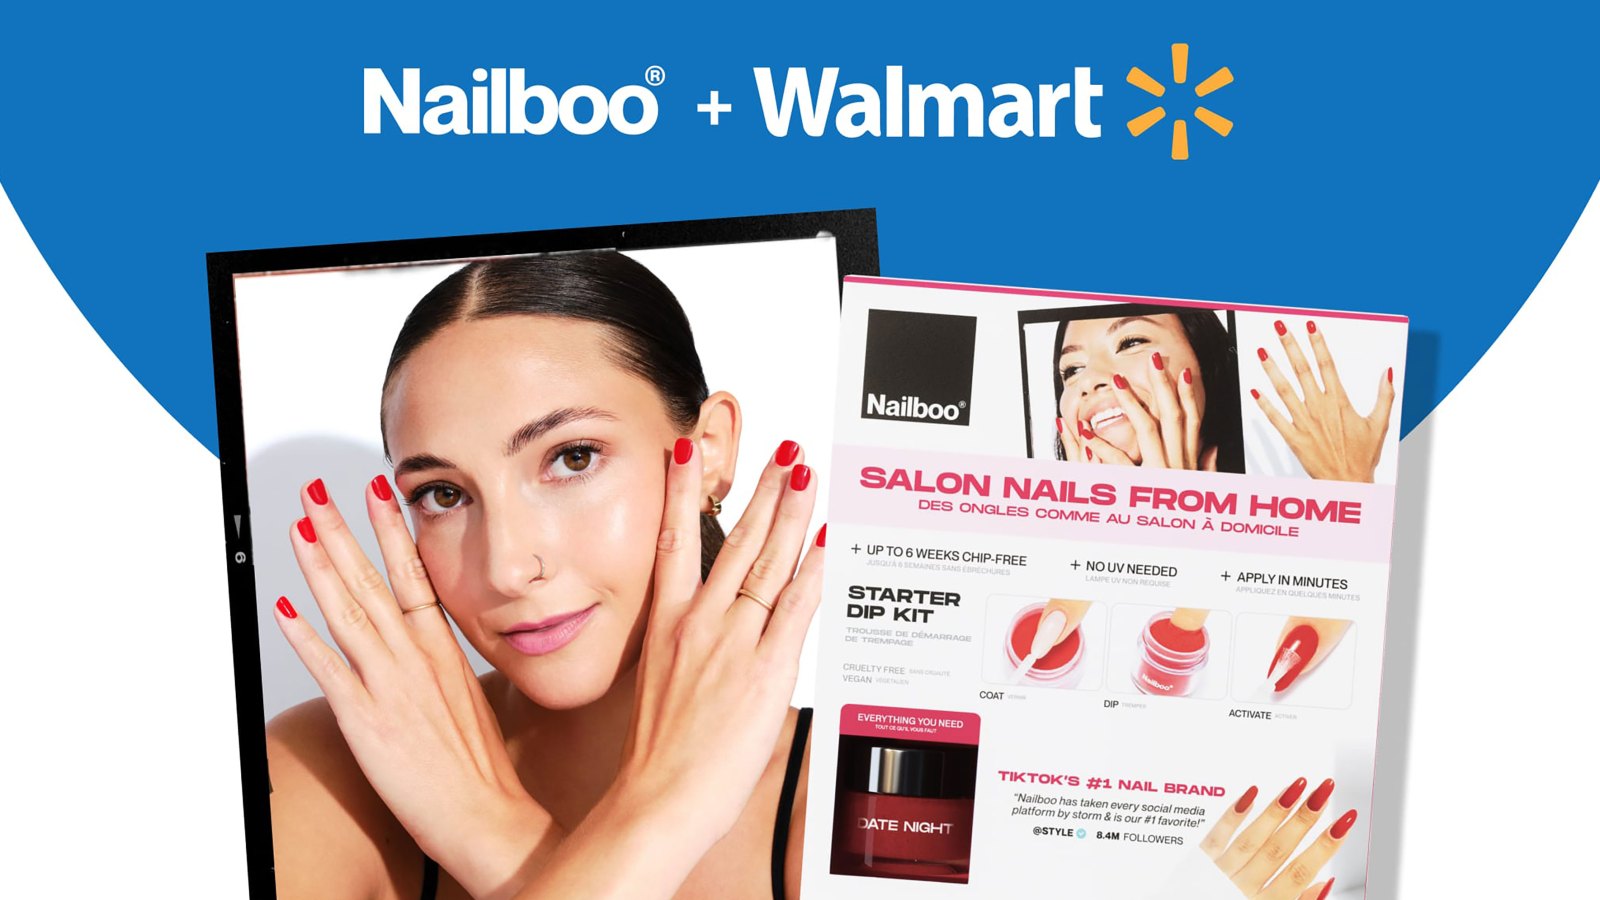 Nailboo, the #1 cult following dip brand, launches in Walmart and is taking over the nail world by storm